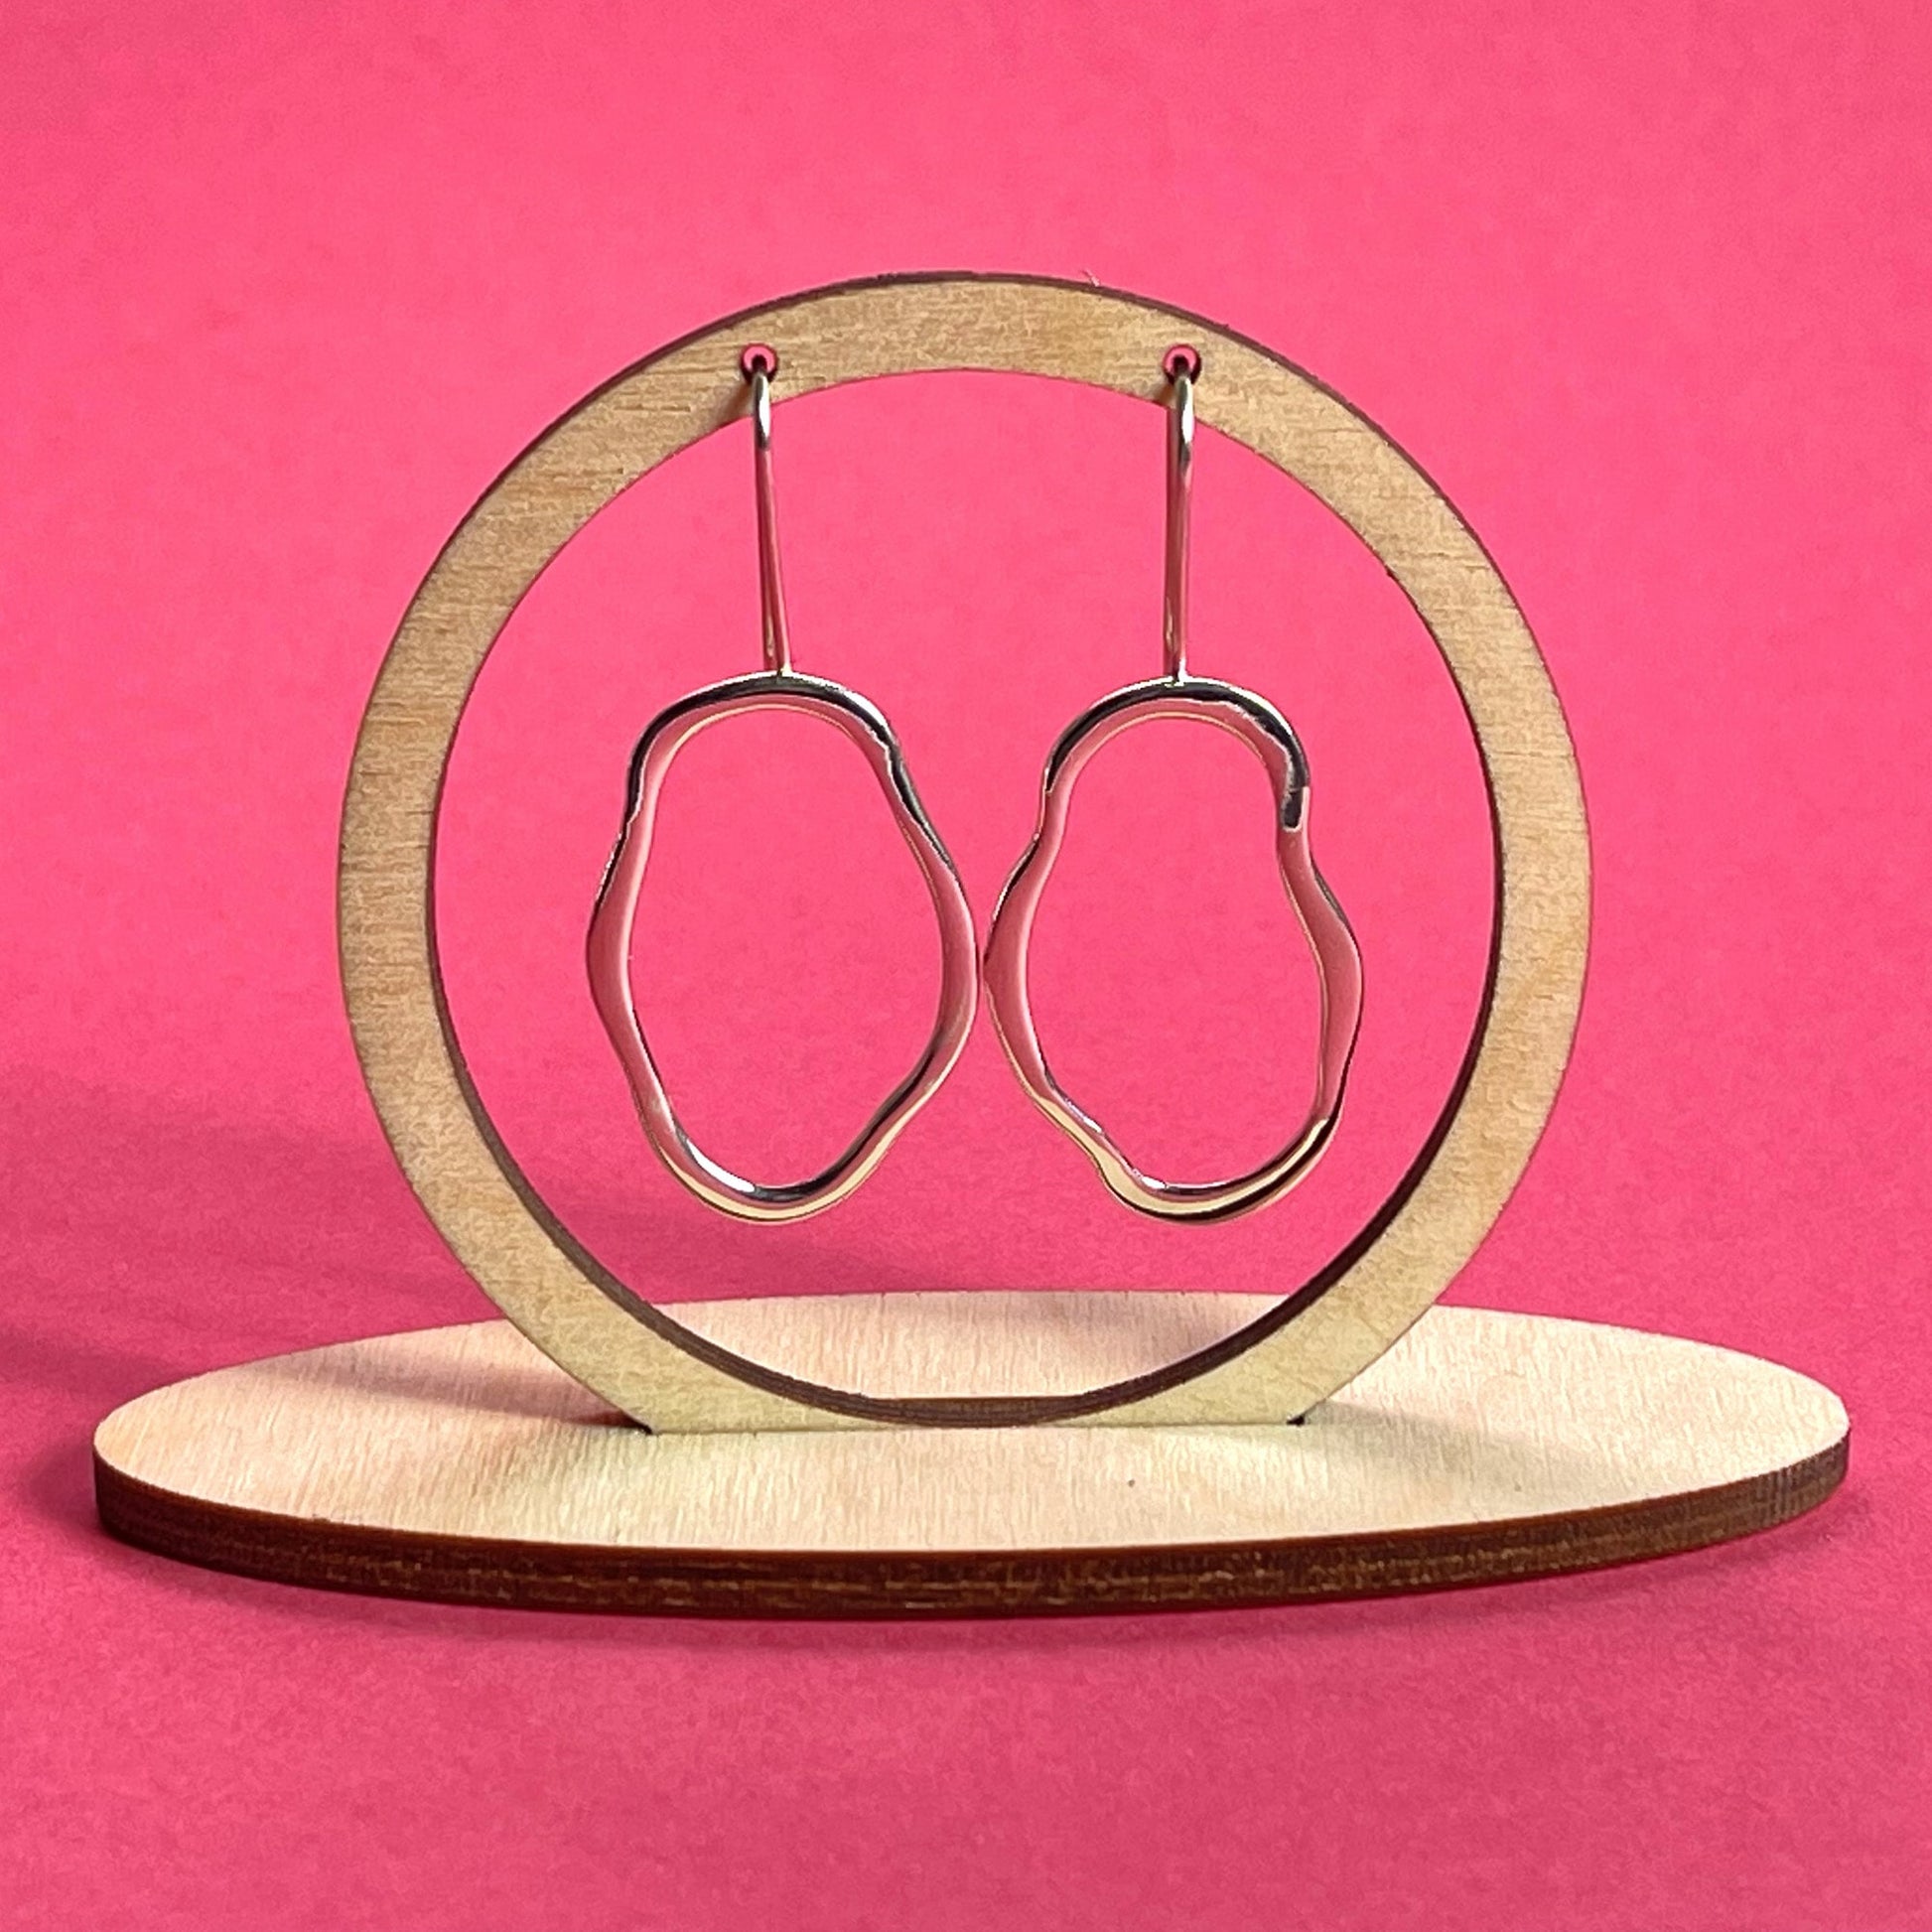 A pair of unique, abstract shaped sterling silver earrings, hanging from a wooden frame on a bright pink background. Handmade by Australian jeweller Rebecca Cordingley.